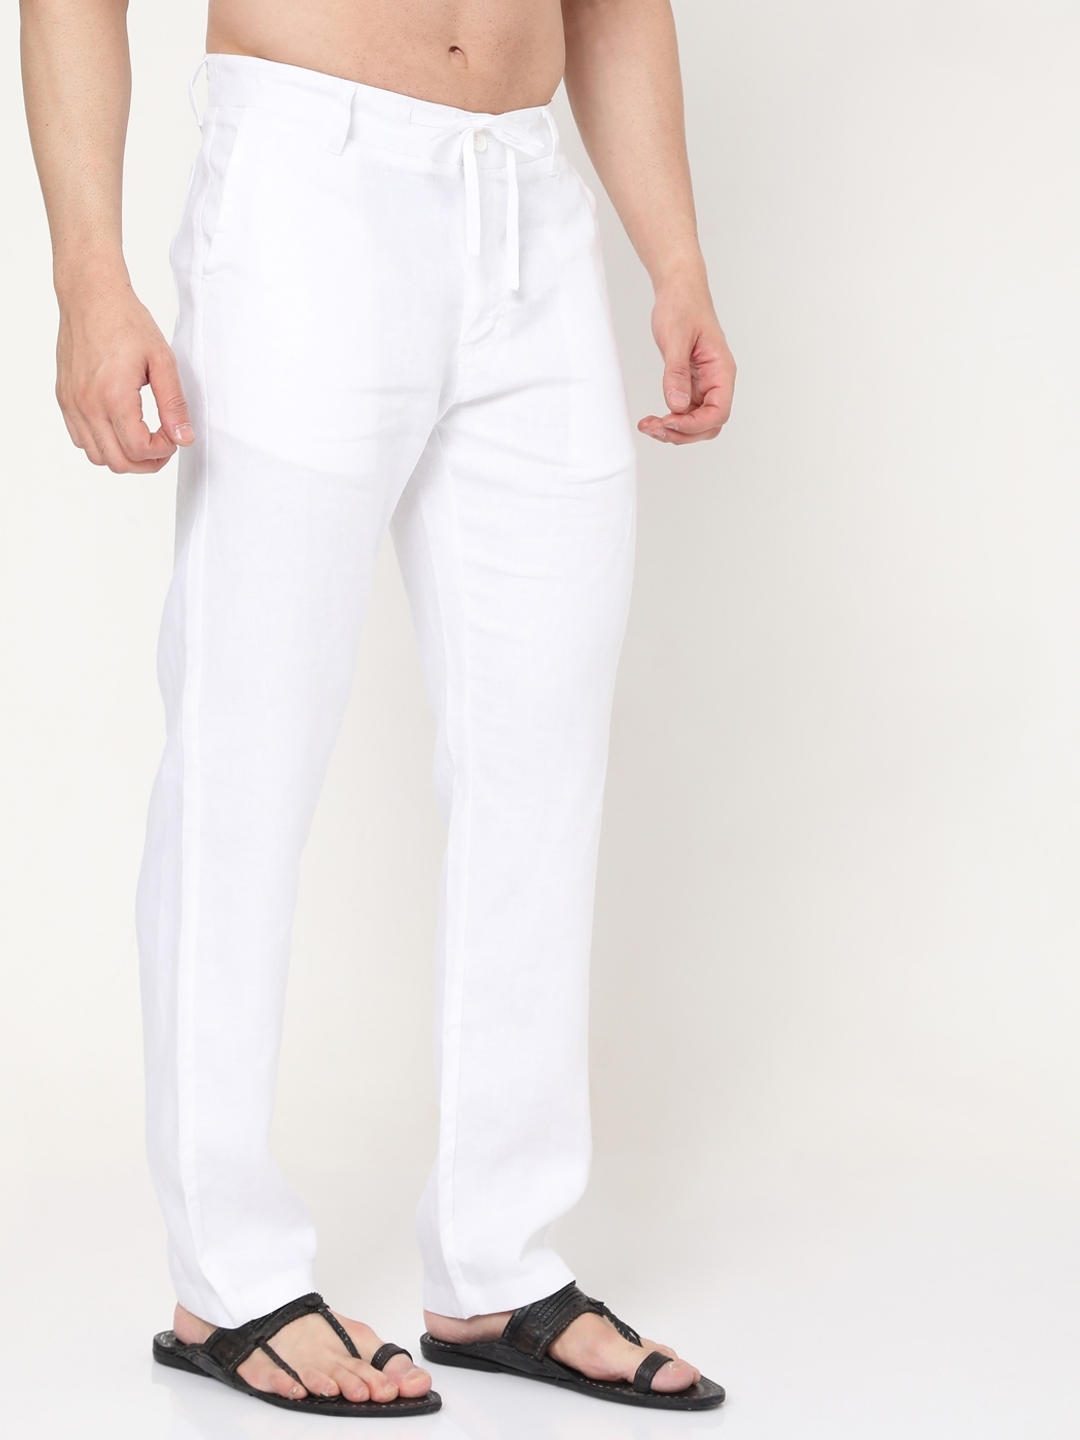 Buy Navy Linen Trouser for Men  Beyours  Page 4